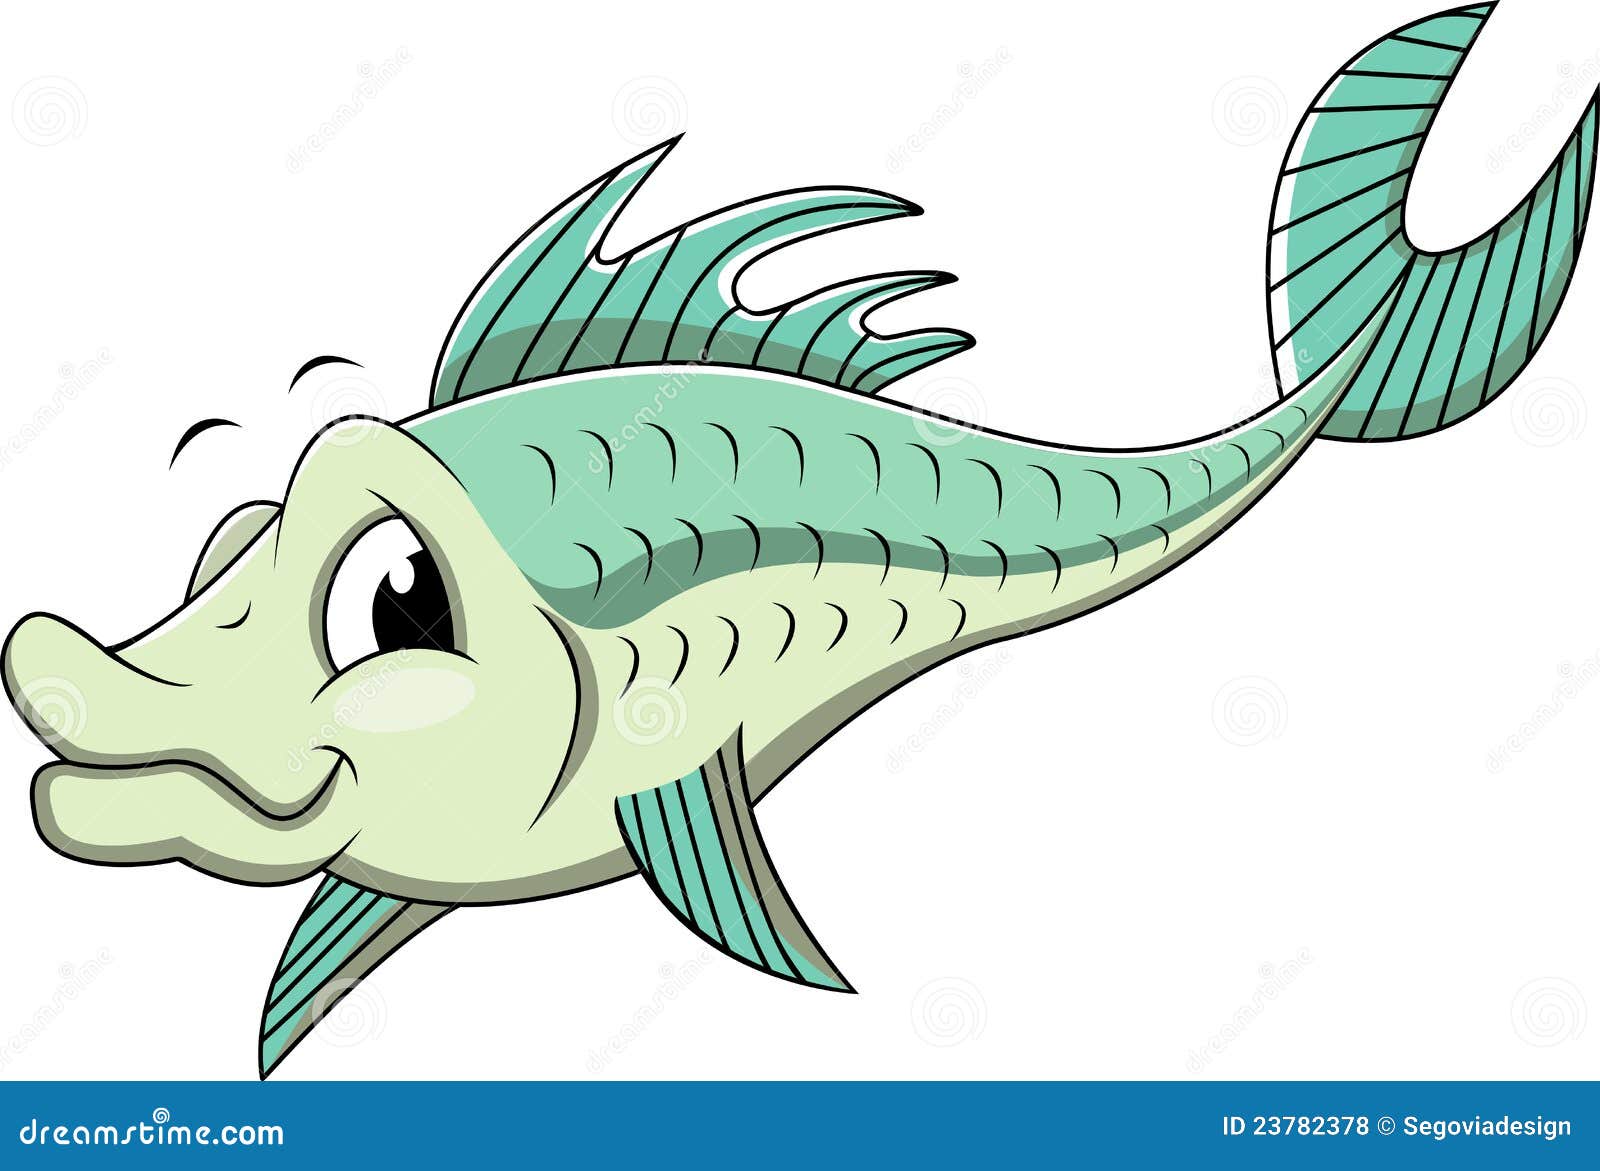 Funny fish cartoon stock vector. Illustration of mouth - 23782378